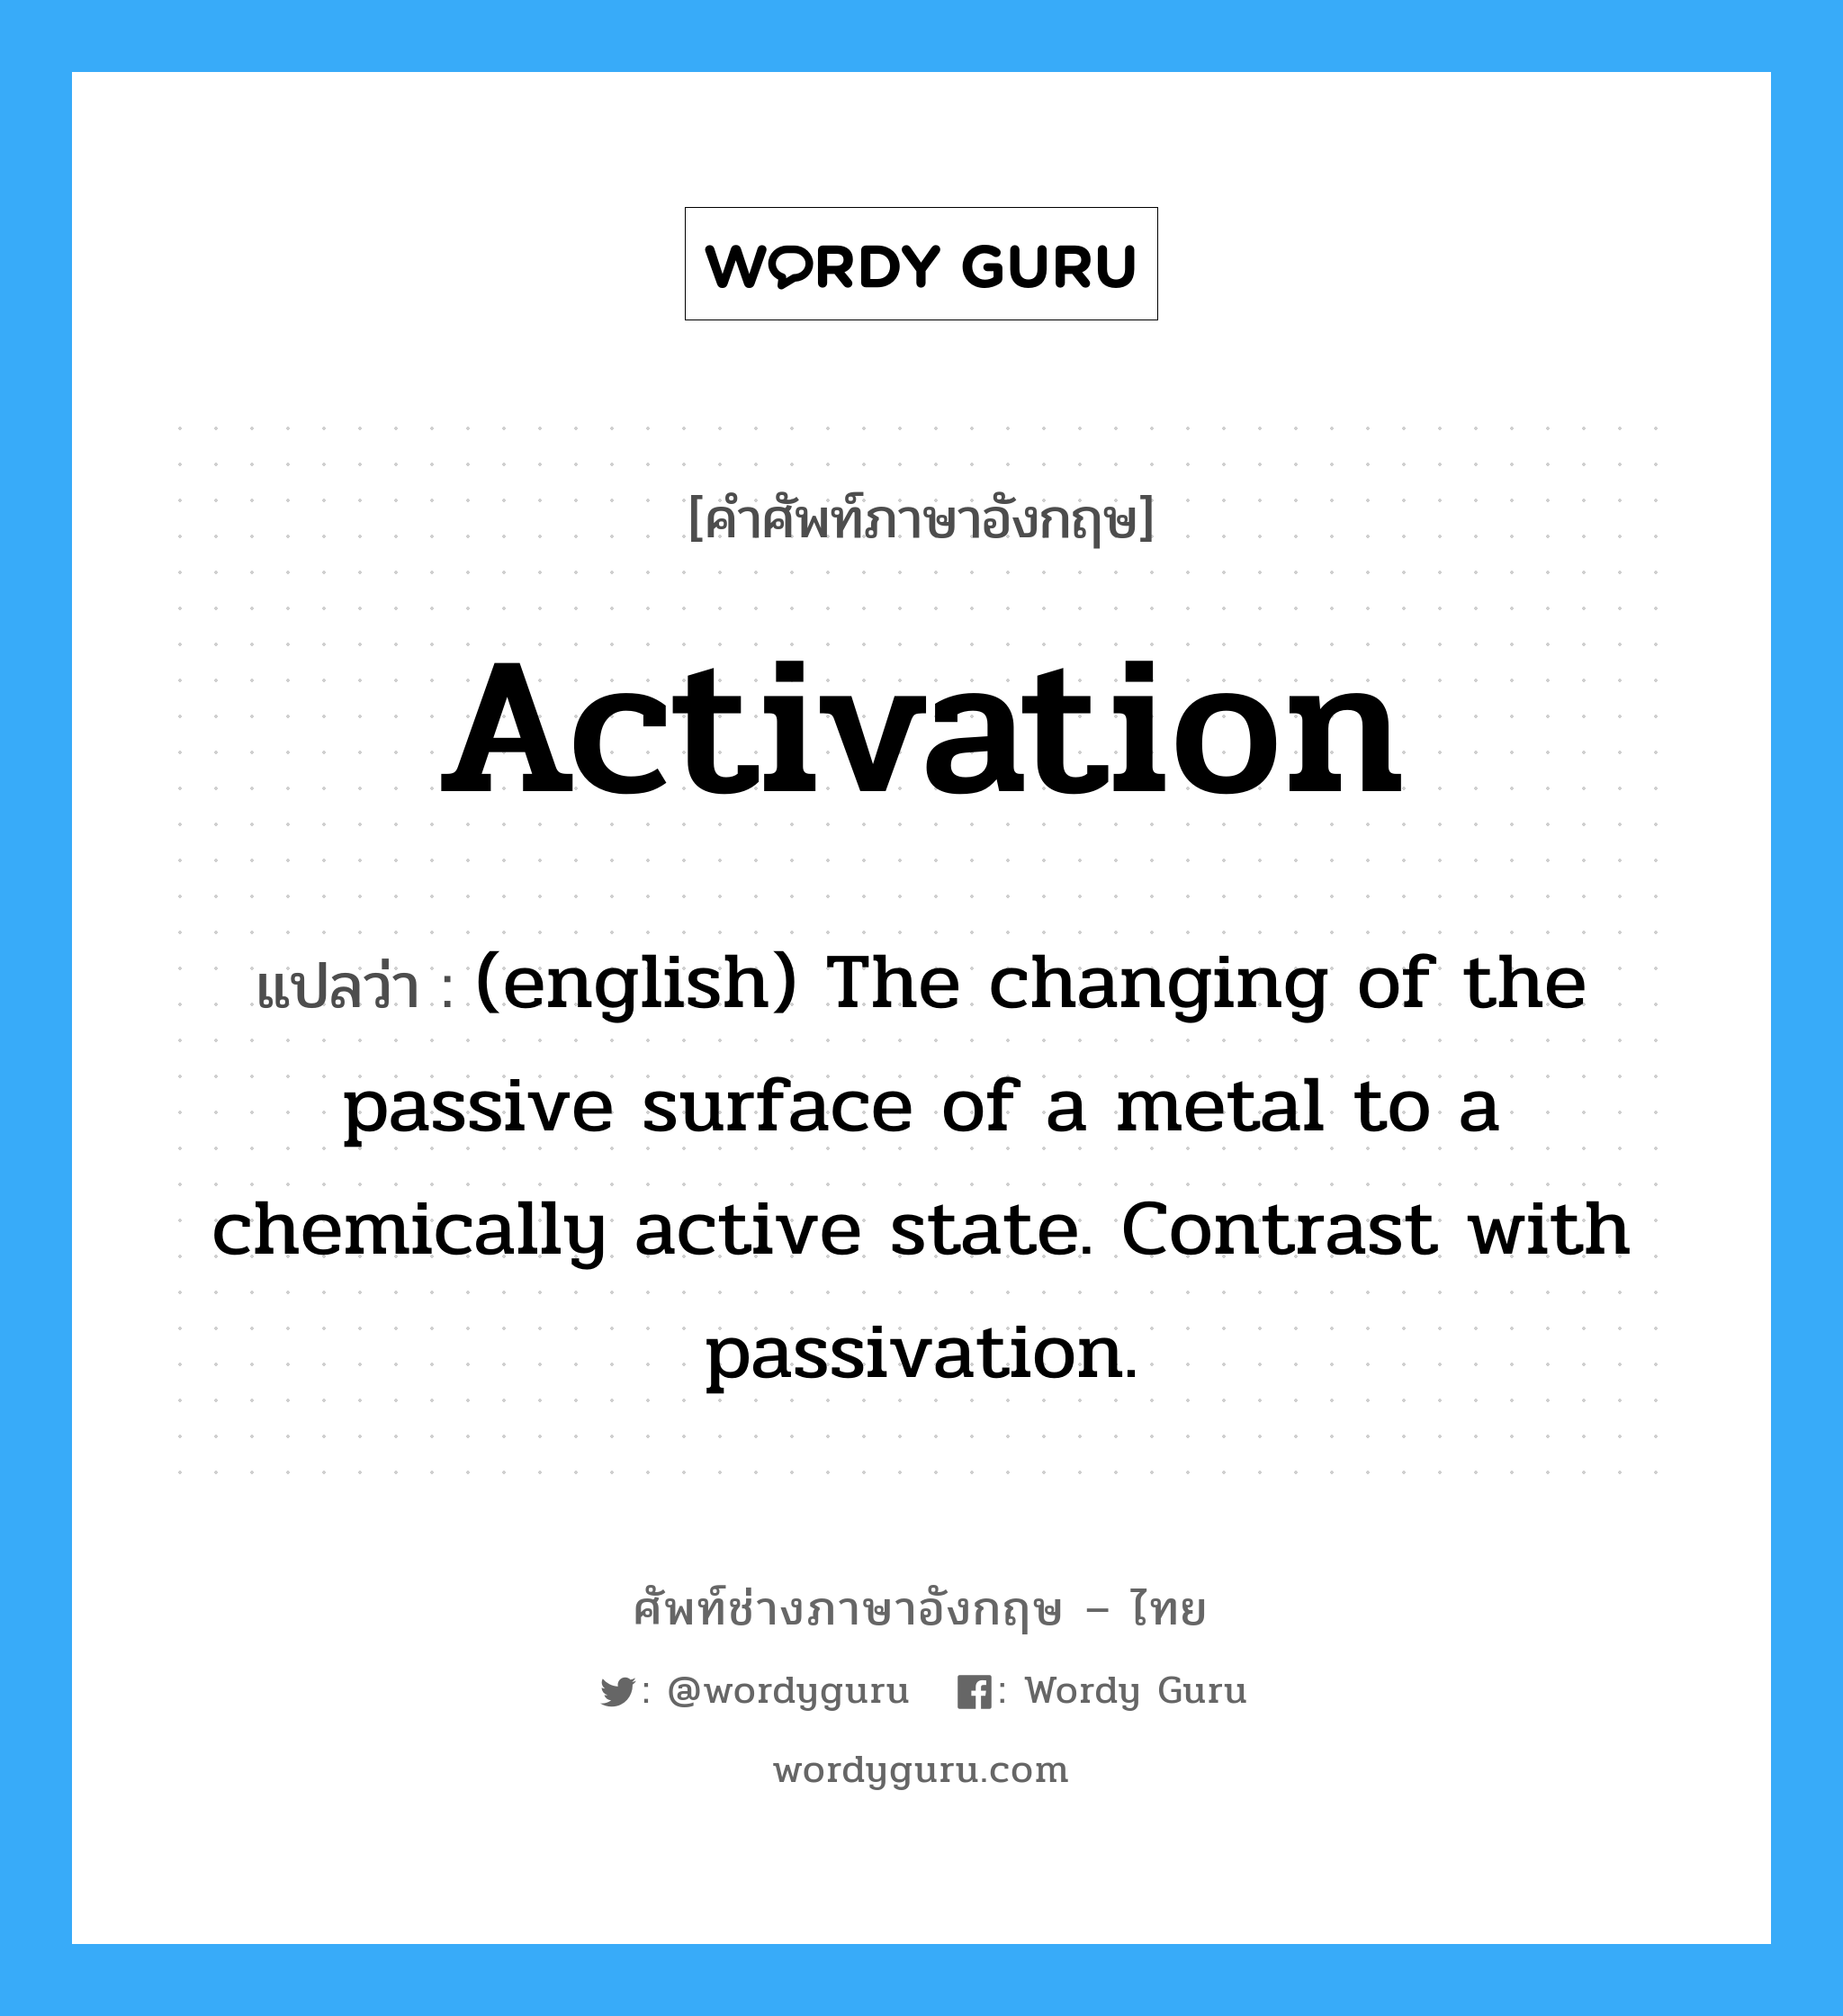 Activation แปลว่า?, คำศัพท์ช่างภาษาอังกฤษ - ไทย Activation คำศัพท์ภาษาอังกฤษ Activation แปลว่า (english) The changing of the passive surface of a metal to a chemically active state. Contrast with passivation.